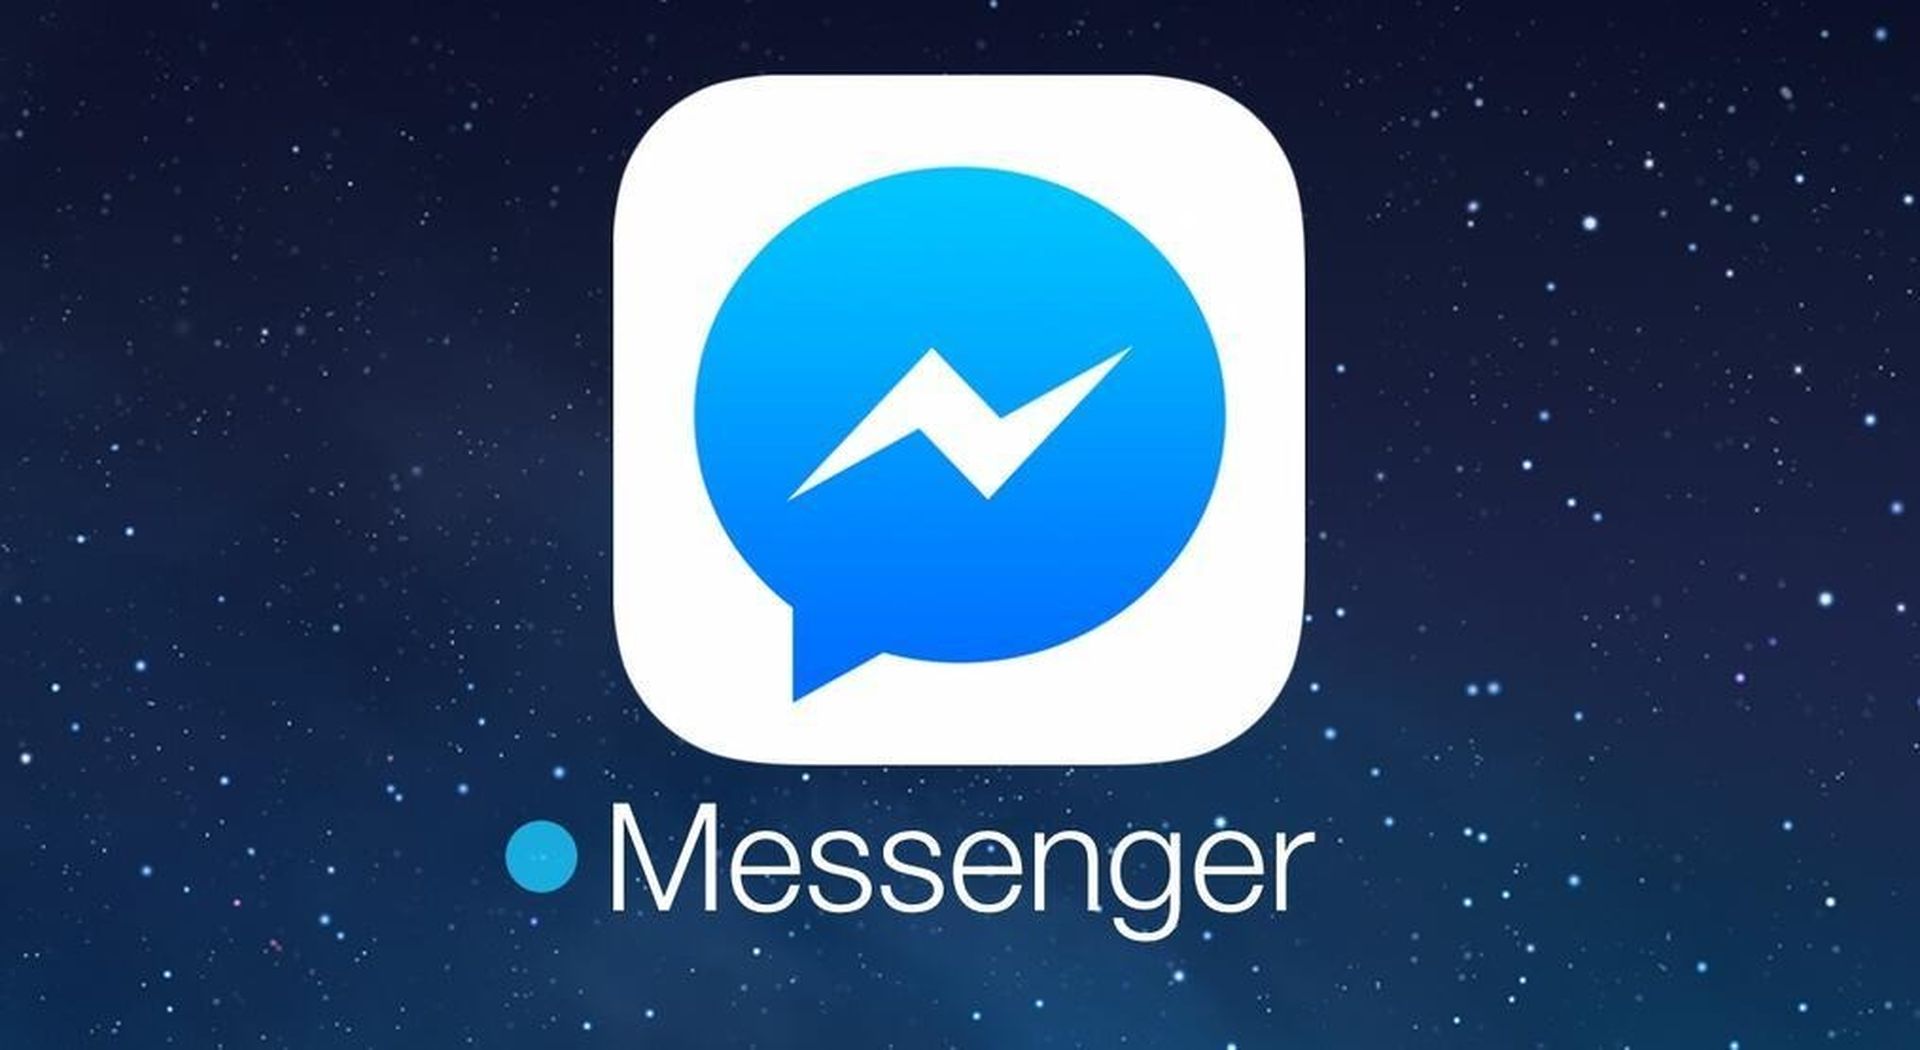 Today we are going to explain How to unblock someone in Messenger, doesn't matter if you use iOS, Android or a web browser.